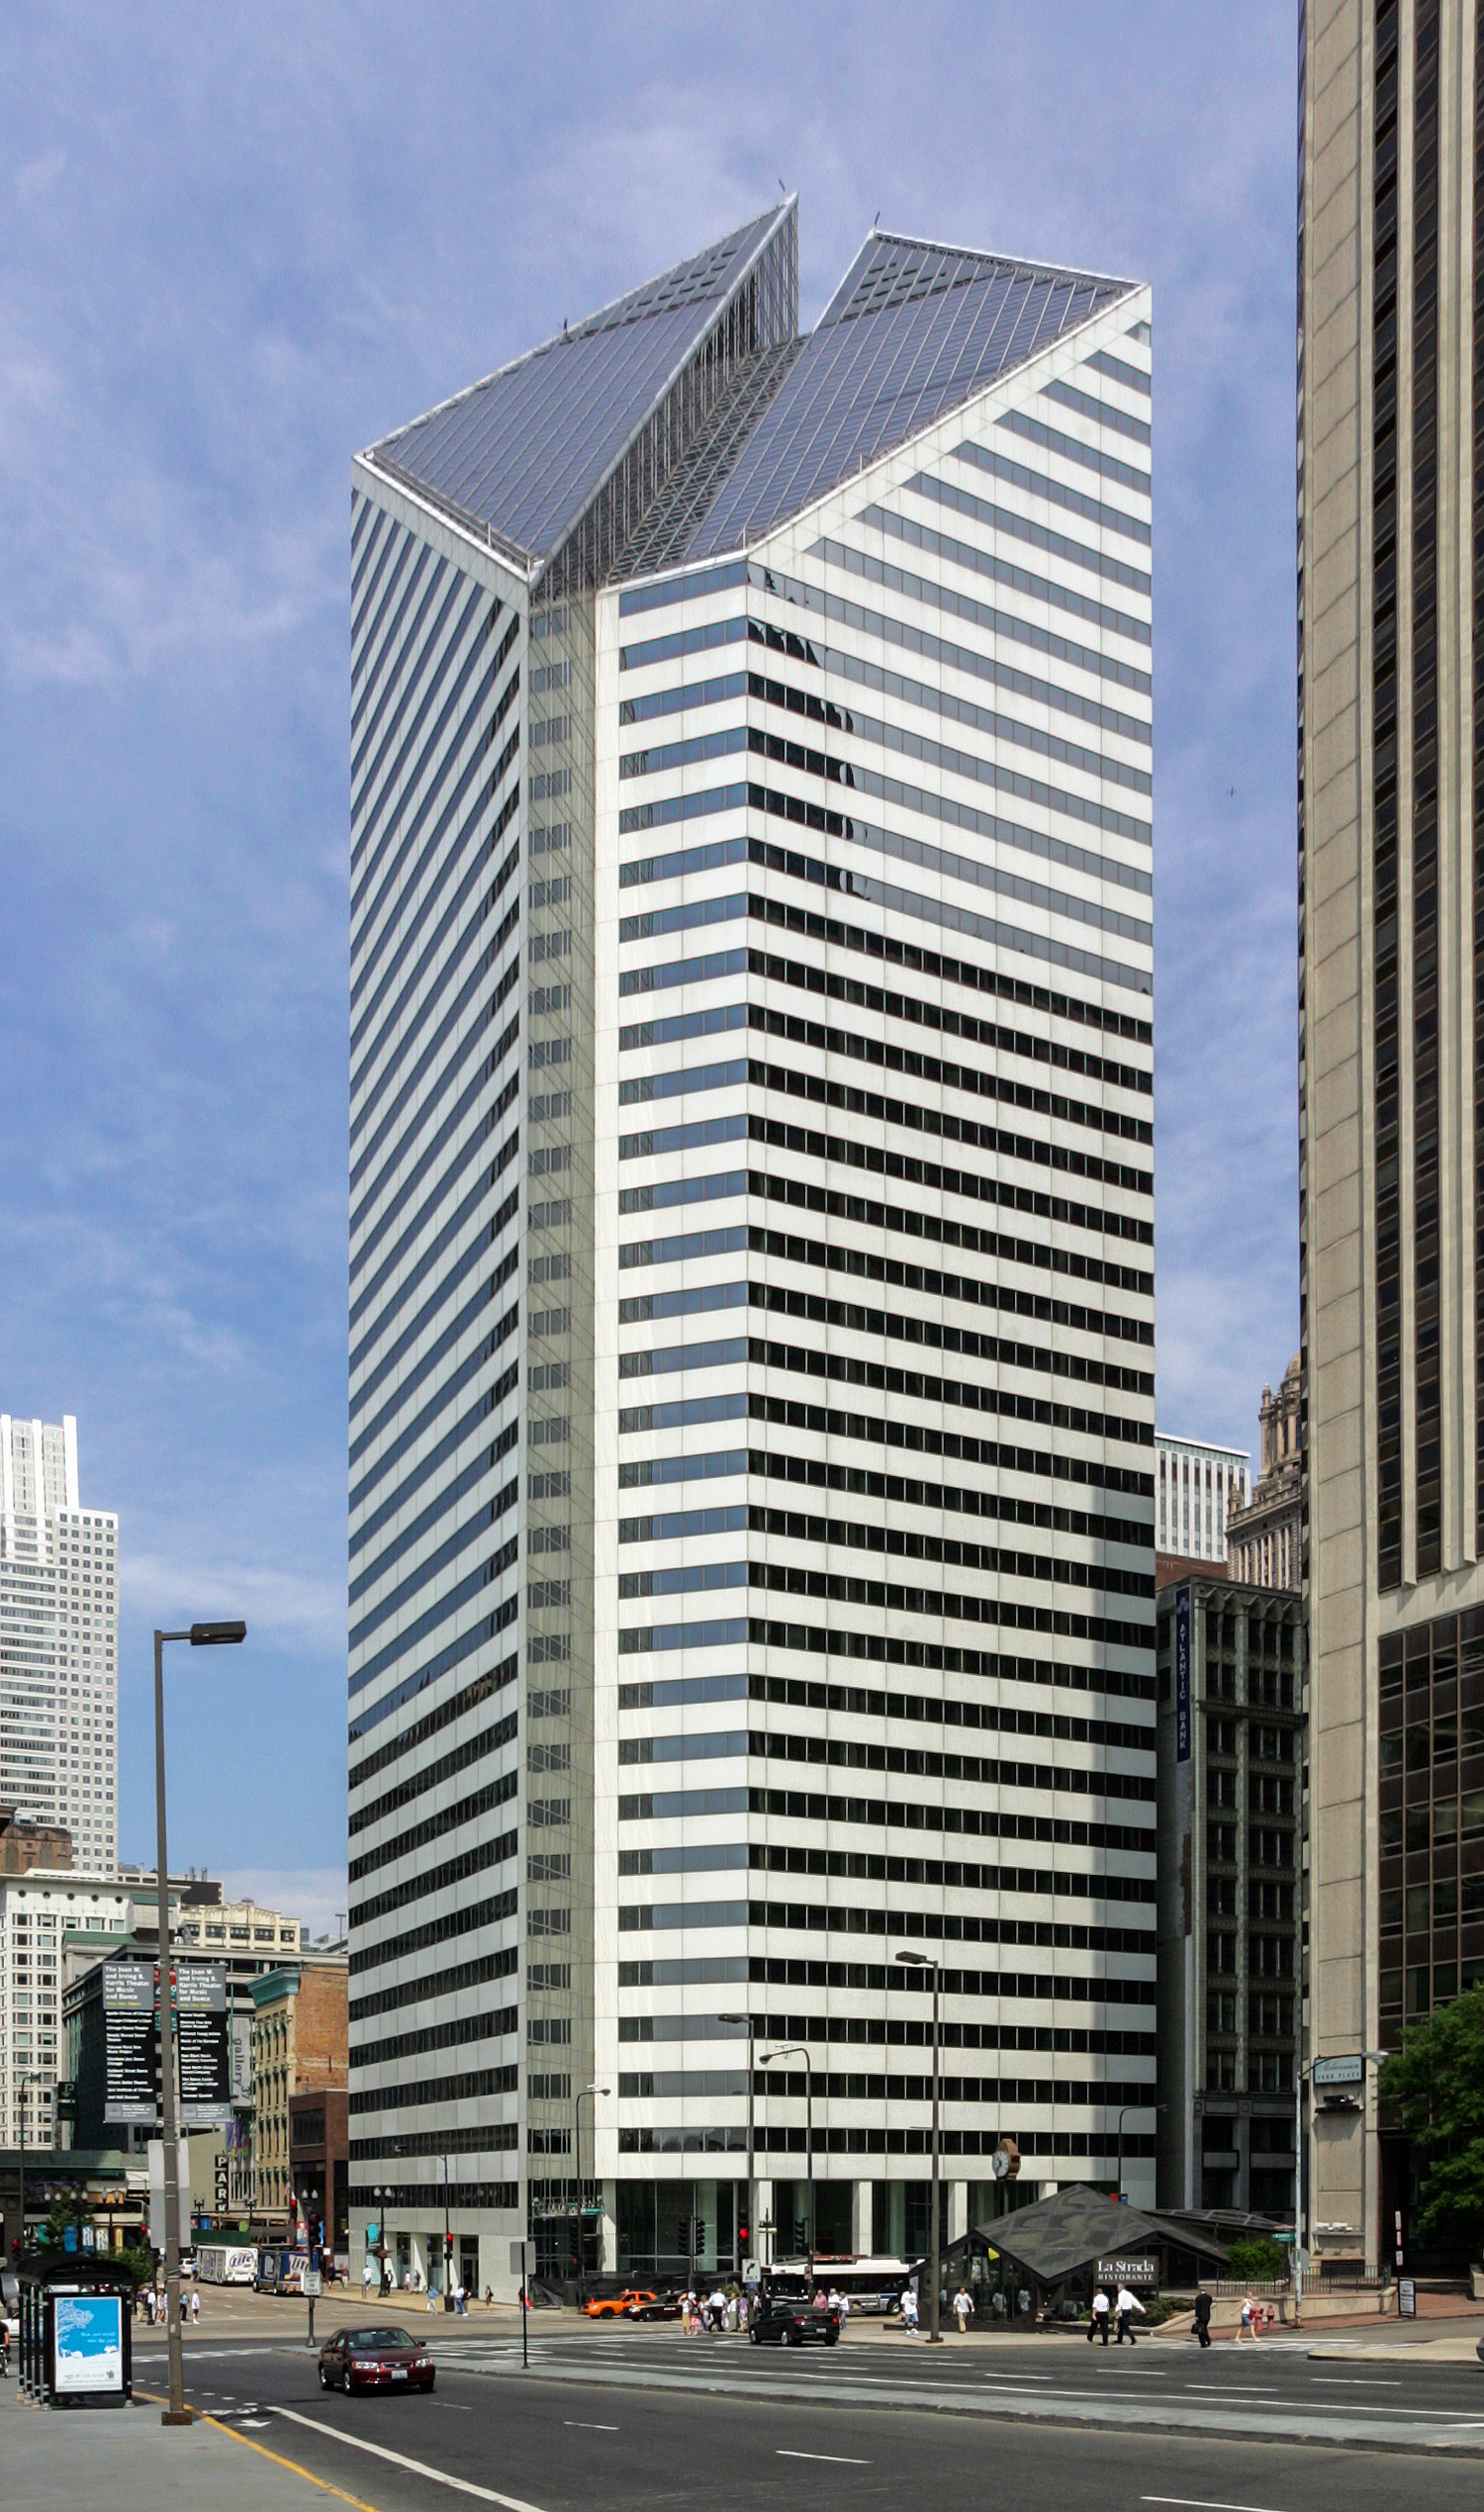 Crain Communications Building, Chicago - View from the east. © Mathias Beinling